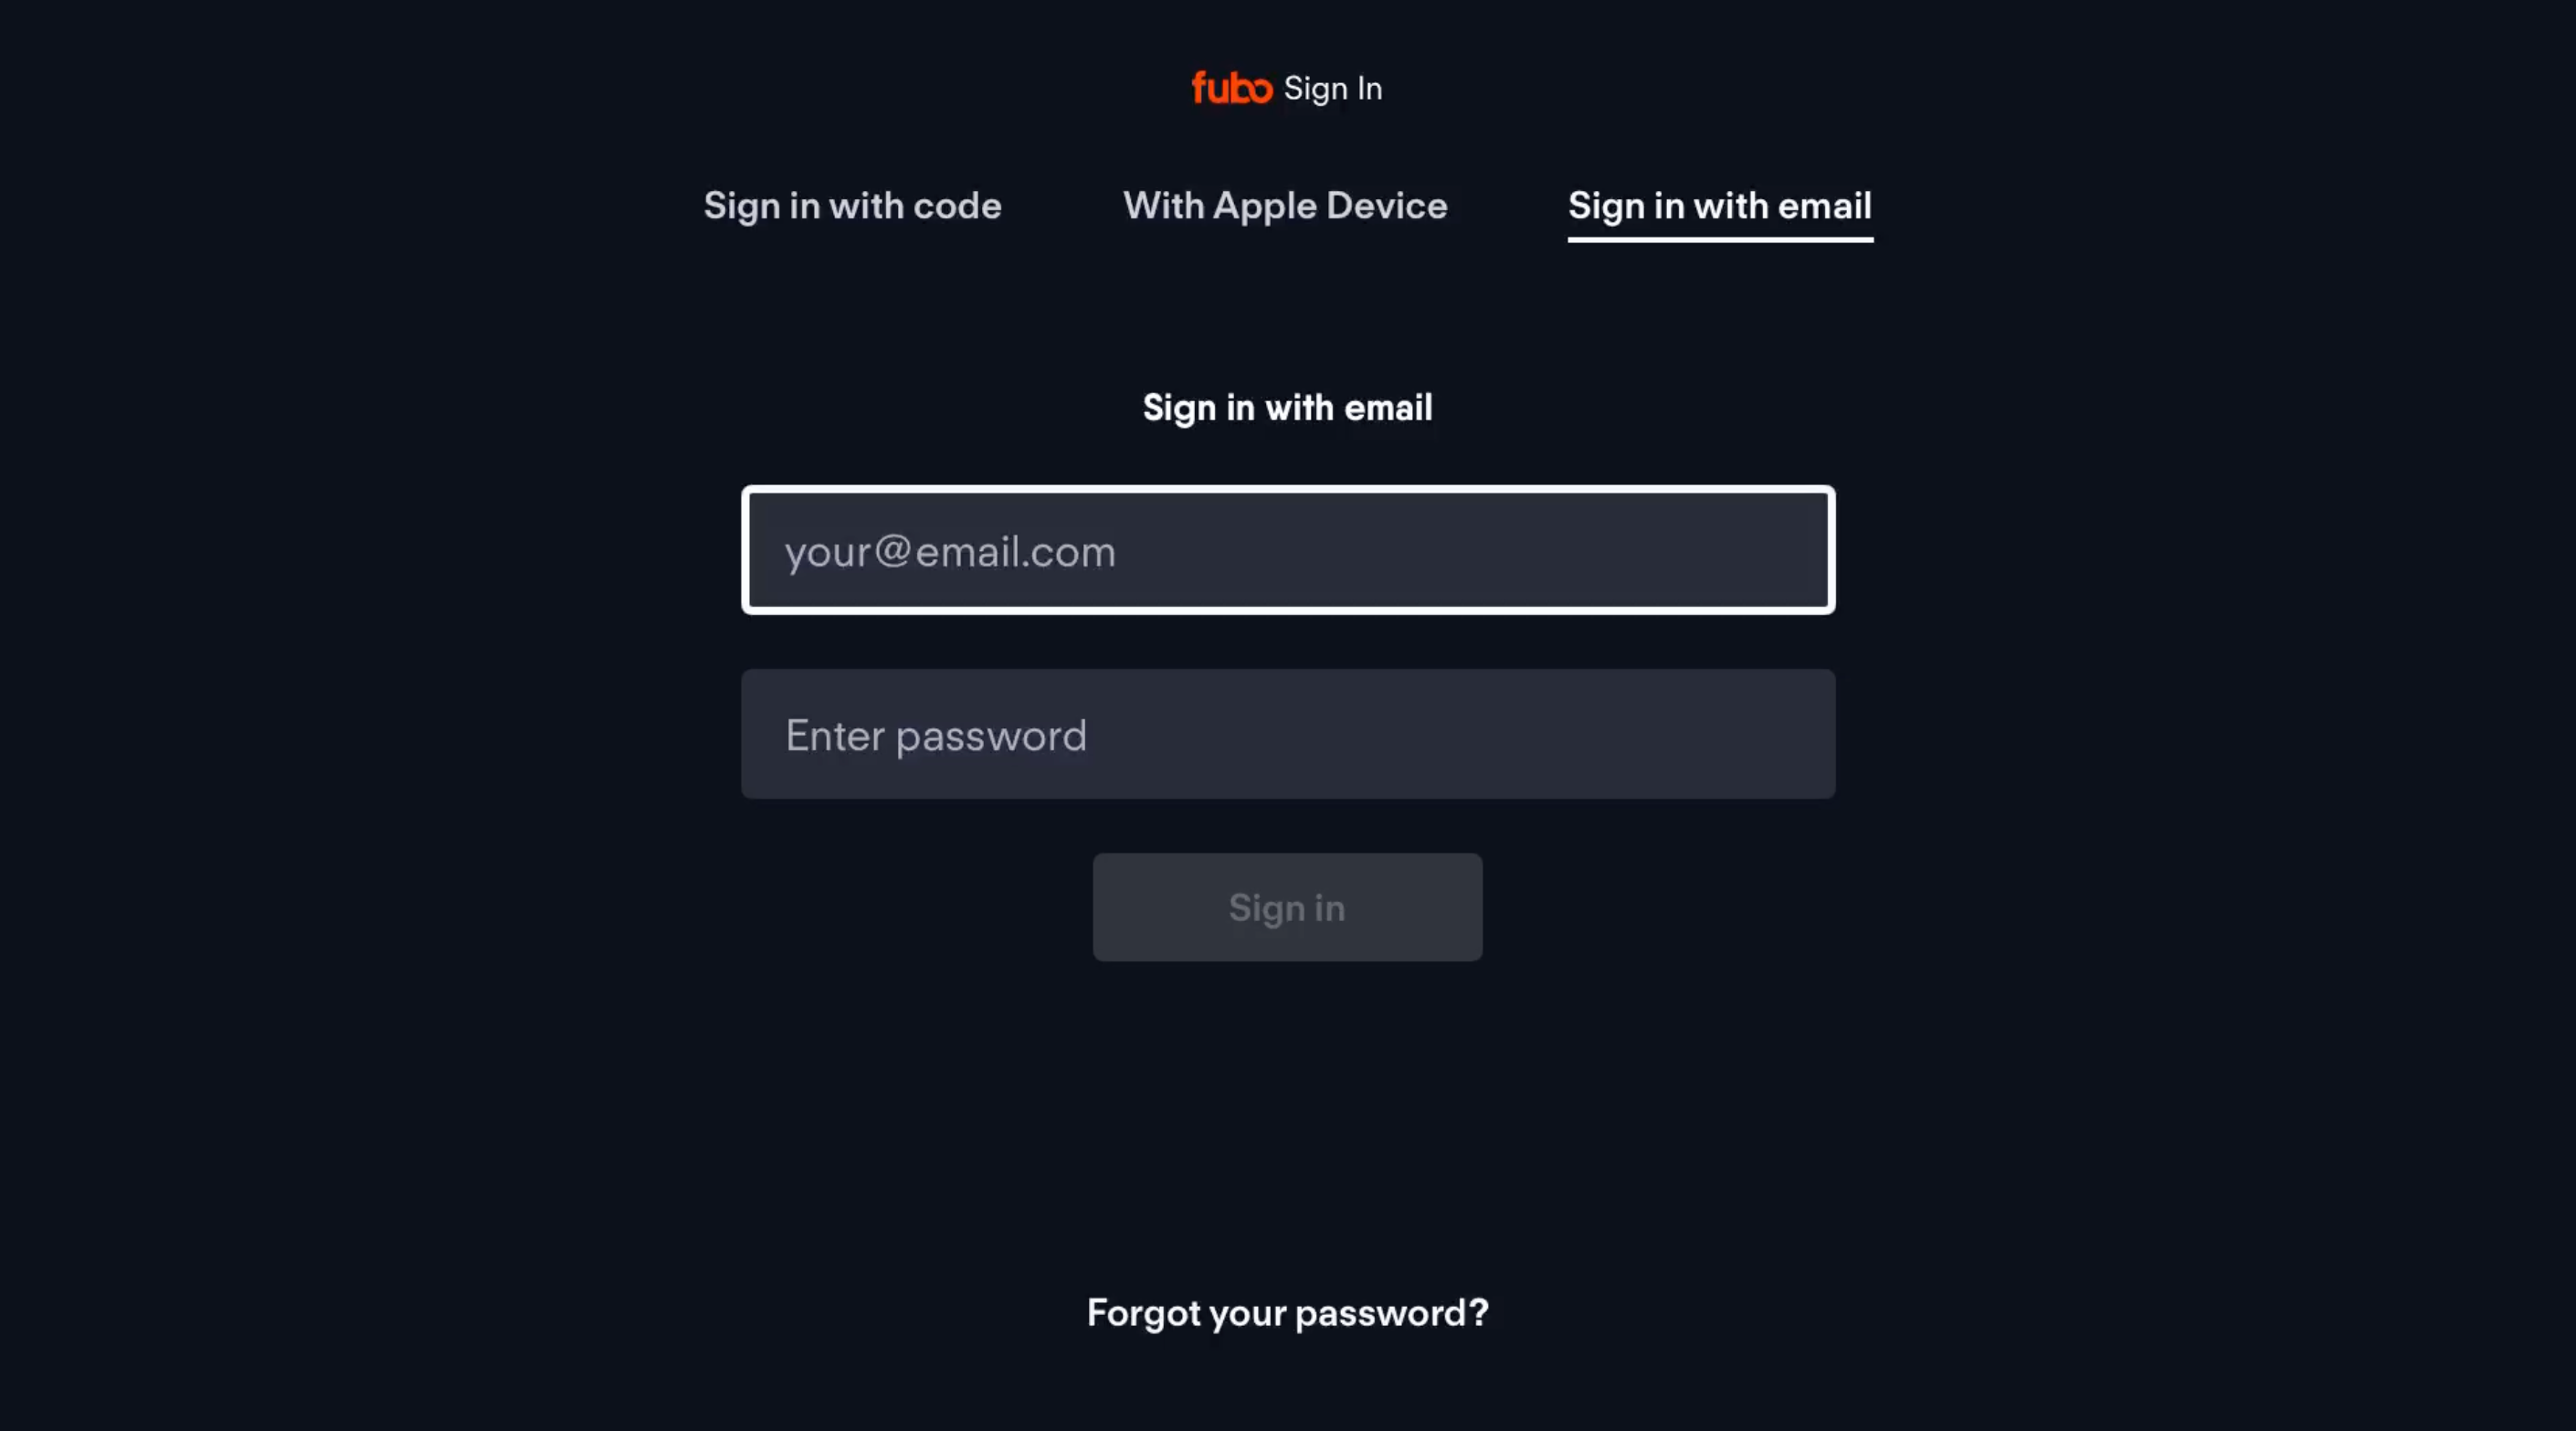 Email sign in screen for the FuboTV app on Apple TV, with email and password fields